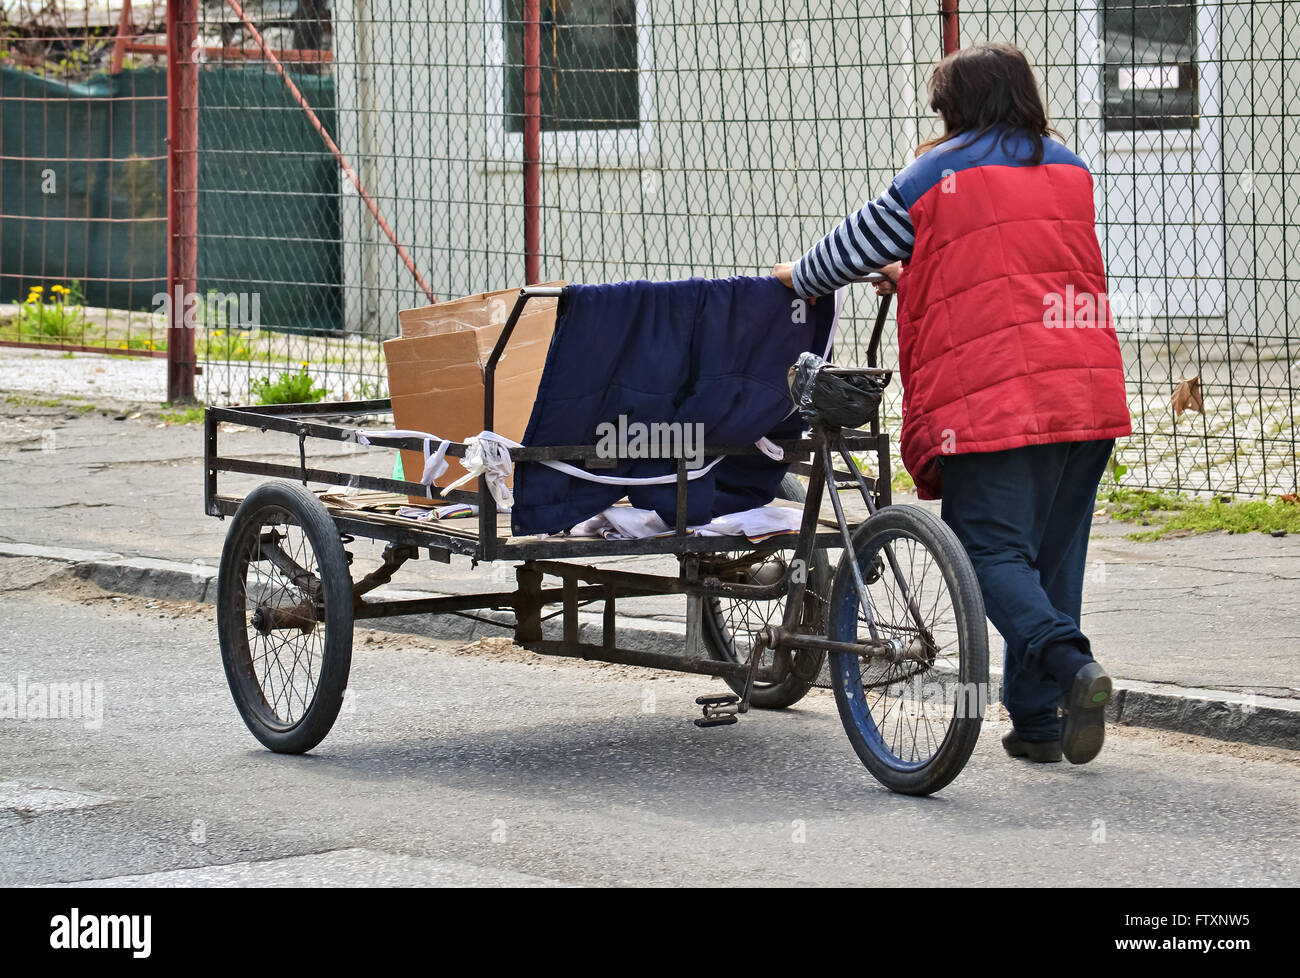 Poor woman pushing an old three wheel cart on the street Stock Photo